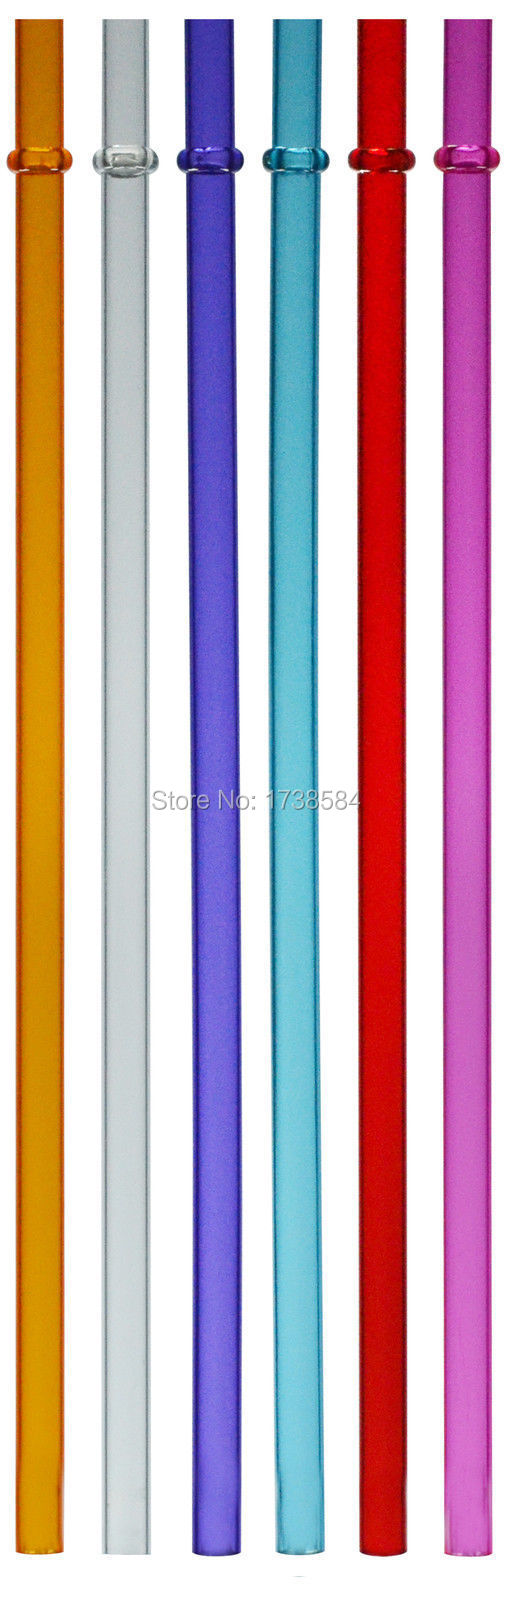 6 Pack Of Colored Replacement Acrylic Straws For Tumblers